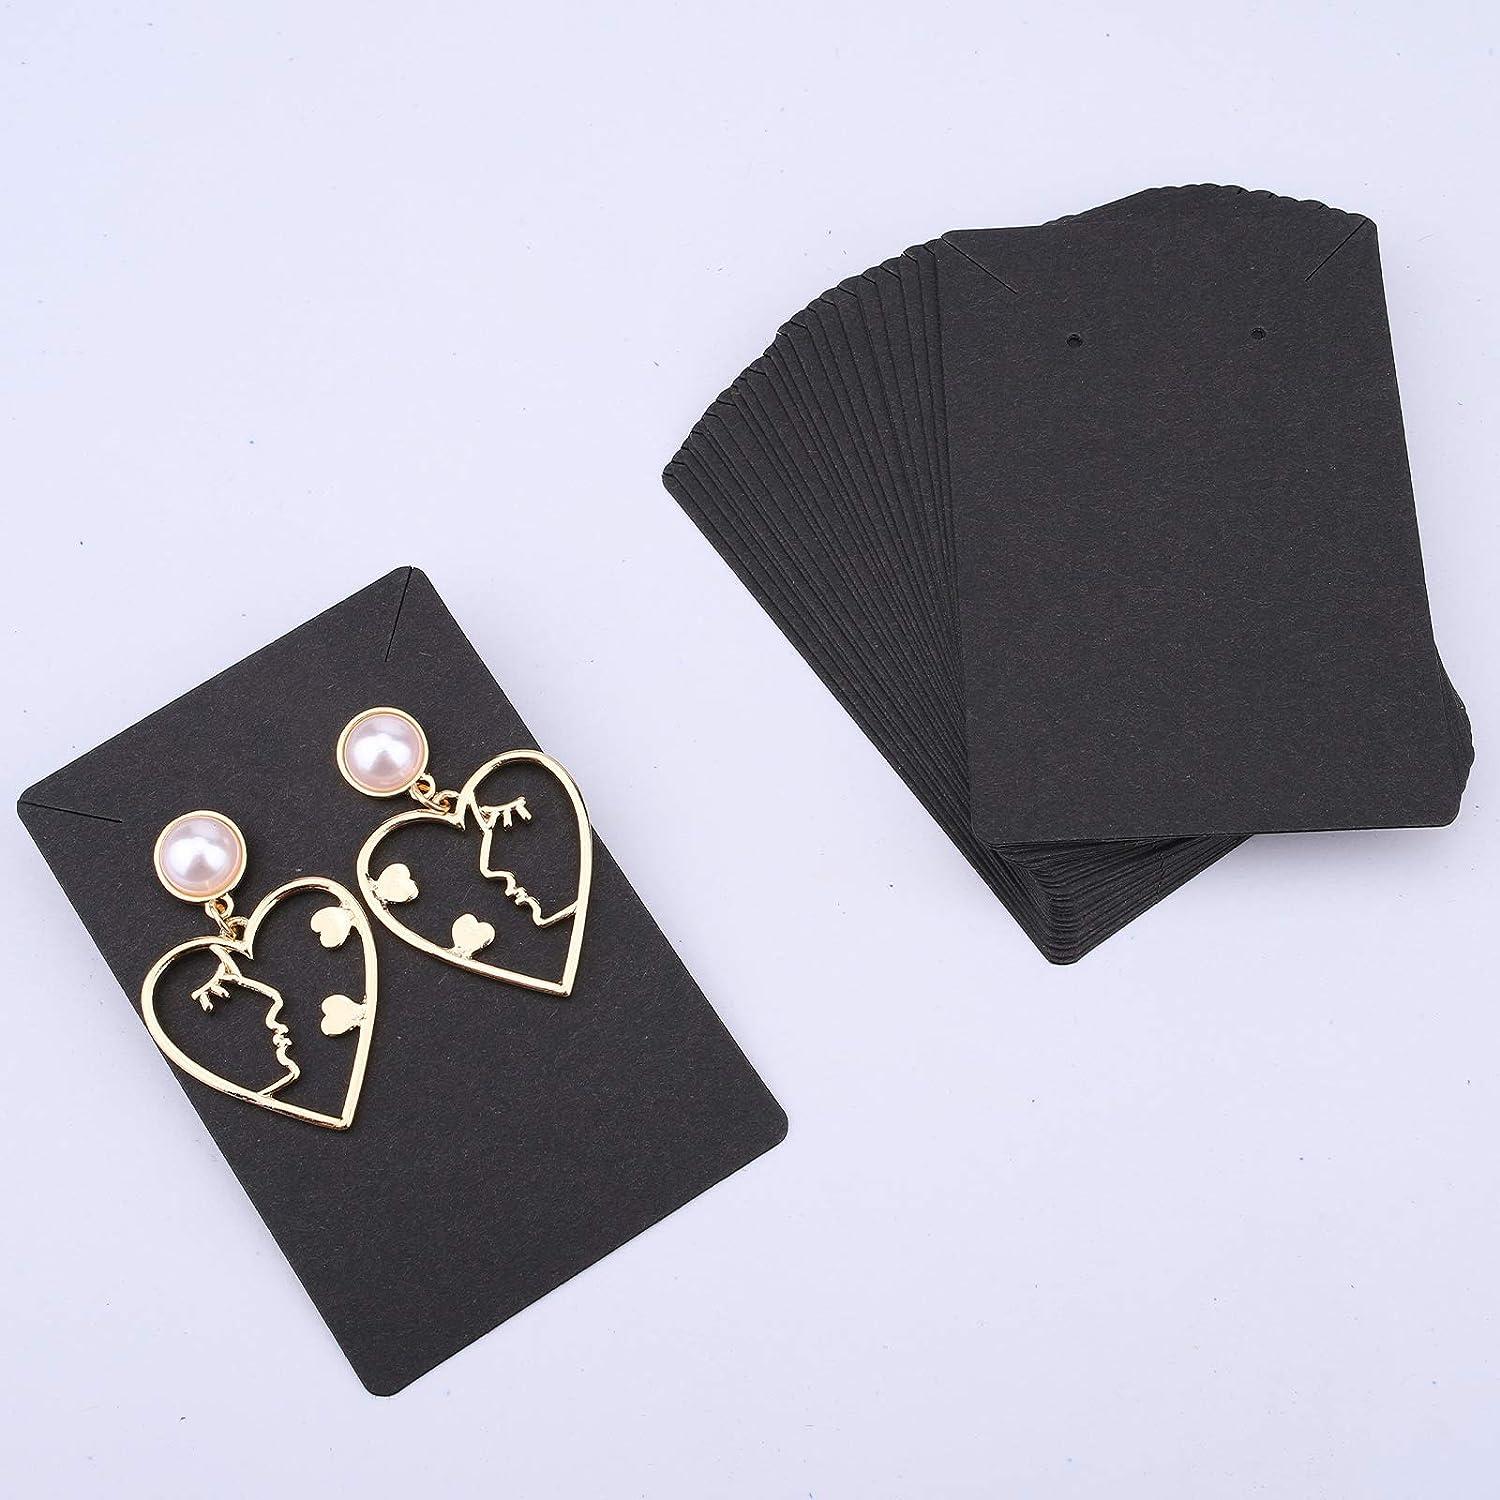  G2PLUS 100PCS Black Necklace Display Cards,2.16'' x 8.27''  Earring Display Cards,Thank You Necklace Cards Hanging Tags, Earring Card  Holders for Selling, Handmade Earrings, Jewelries Packing : Arts, Crafts &  Sewing